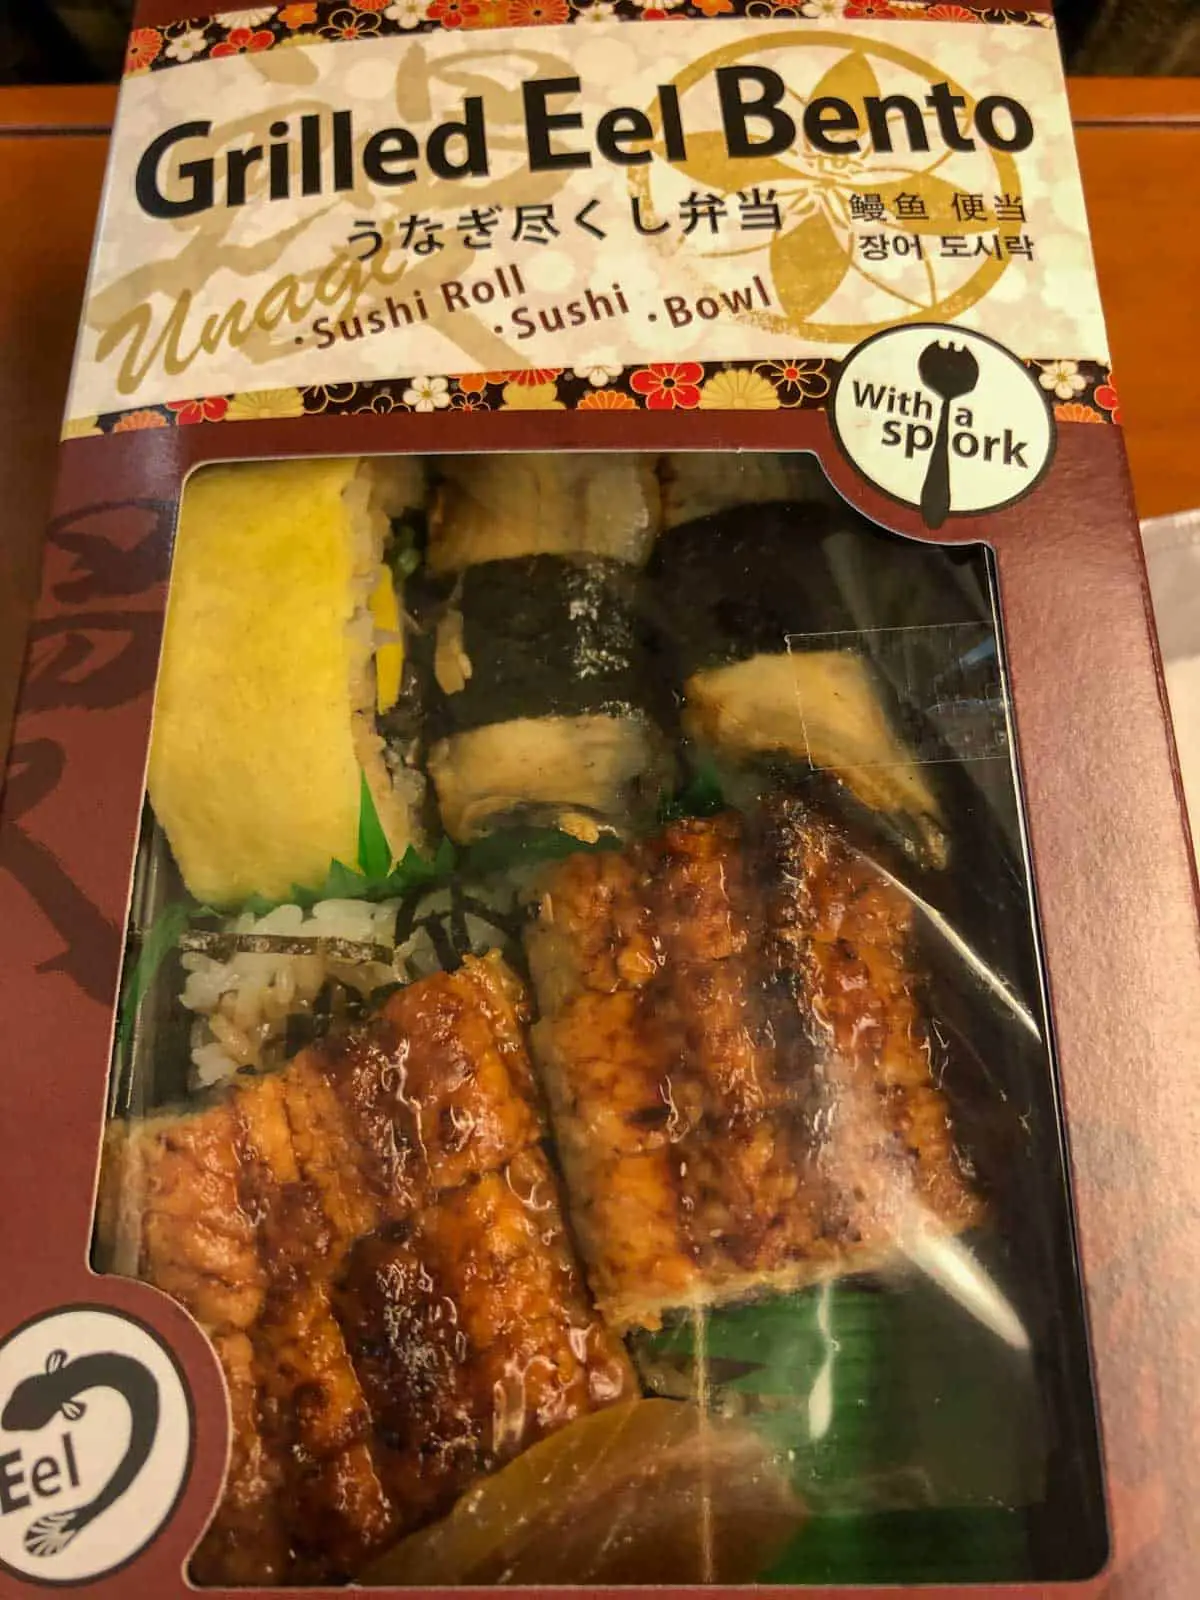 Grilled eel bento box including sushi and rice, and Japanese omelette. 